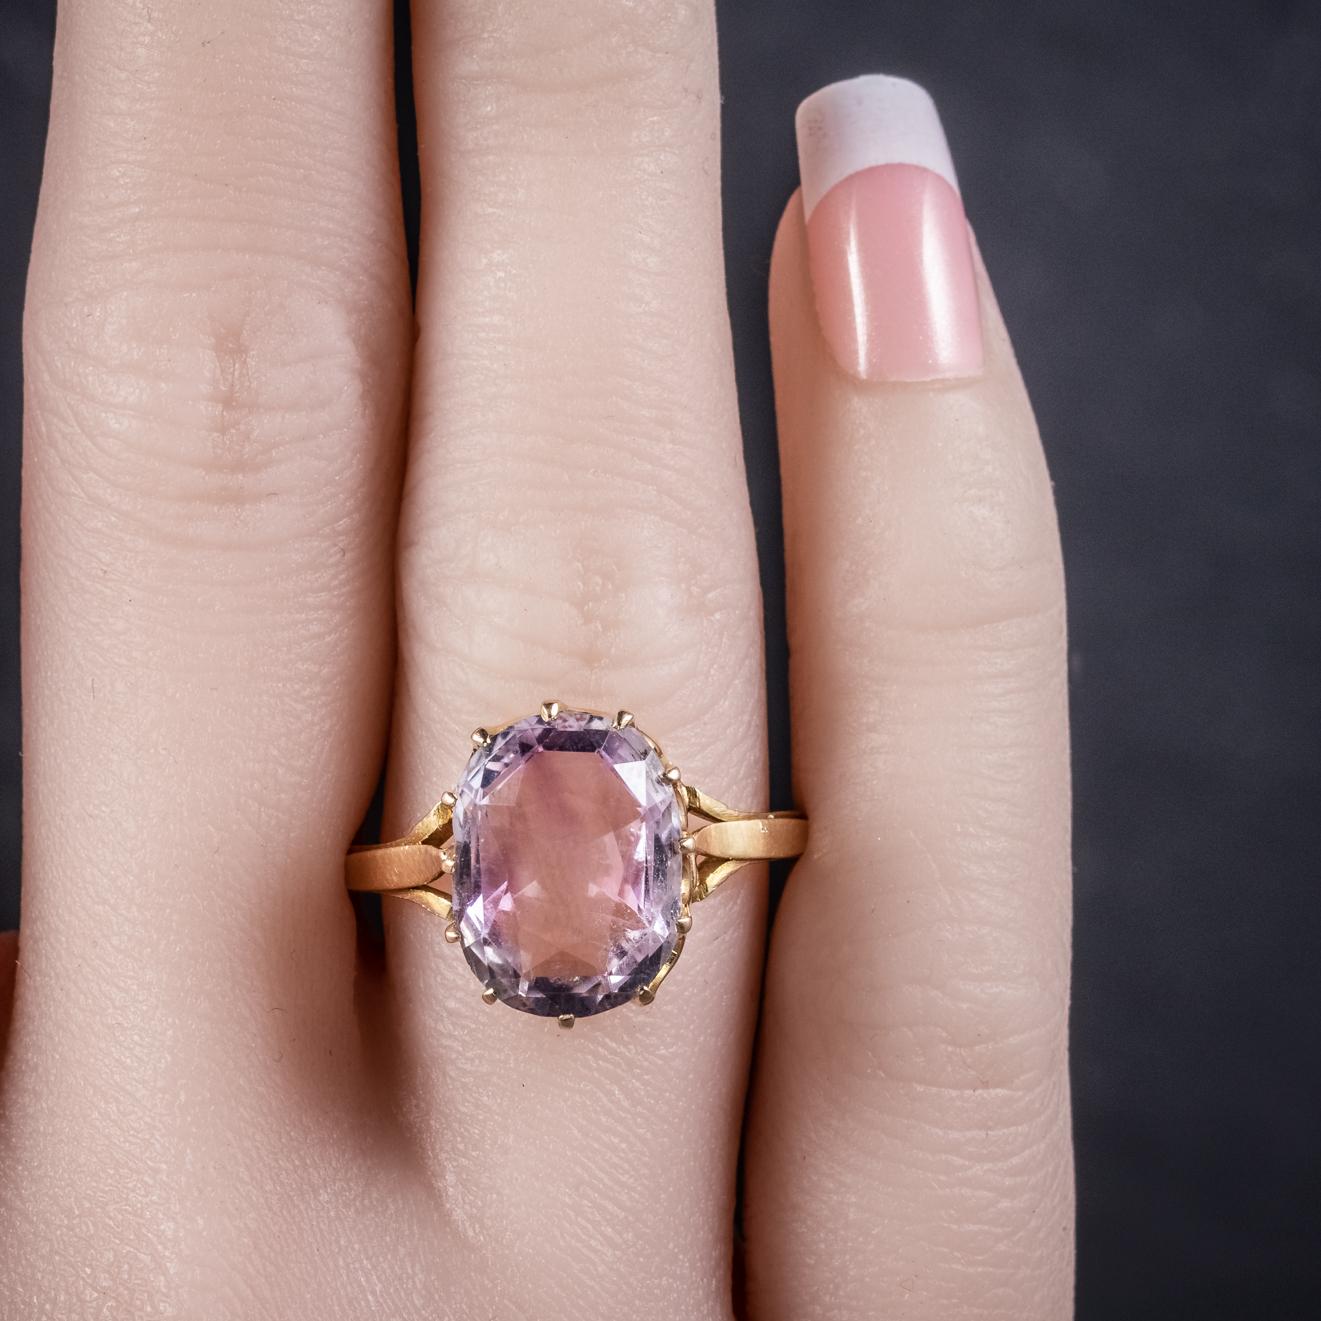 Antique Victorian Purple Spinel 18 Carat Gold 5 Carat Spinel, circa 1900 Ring For Sale 5